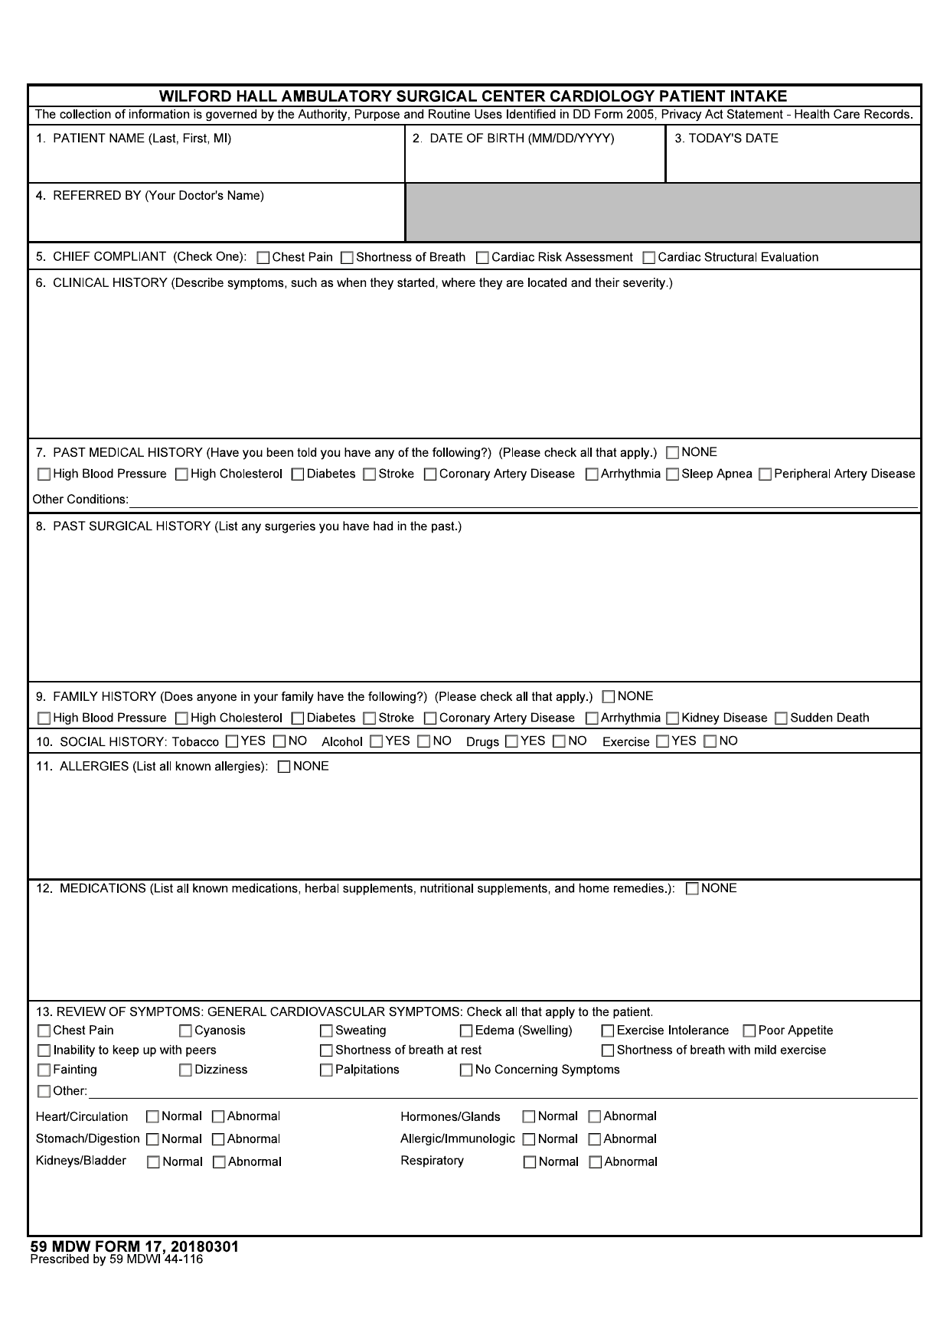 59 MDW Form 17 Wilford Hall Ambulatory Surgical Center Cardiology Patient Intake, Page 1